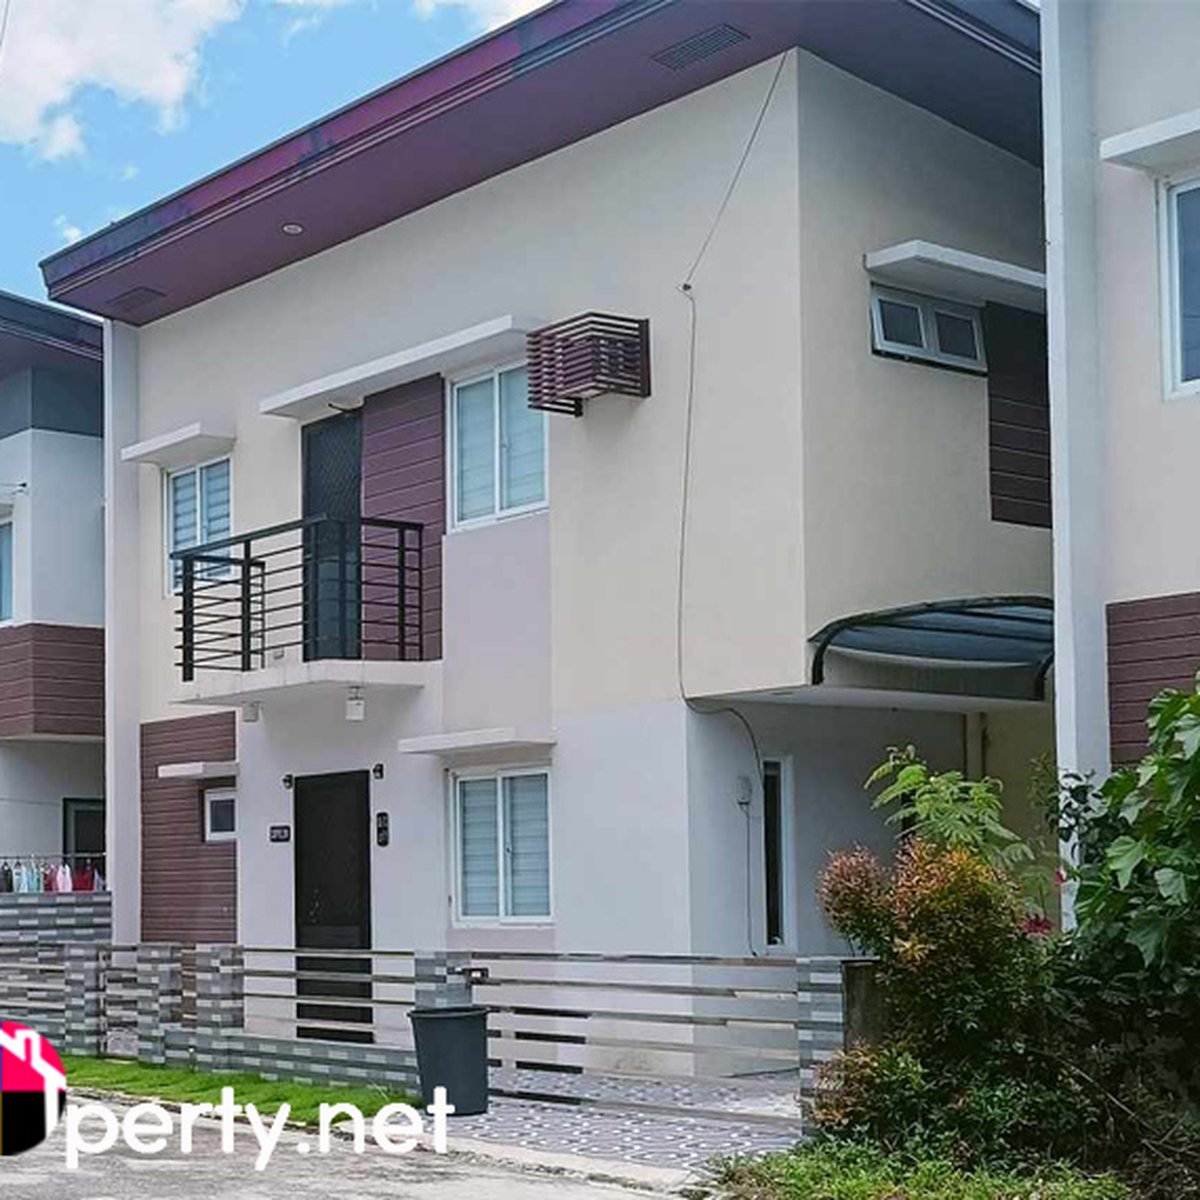 4-bedroom Single Attached House For Sale in Liloan Cebu